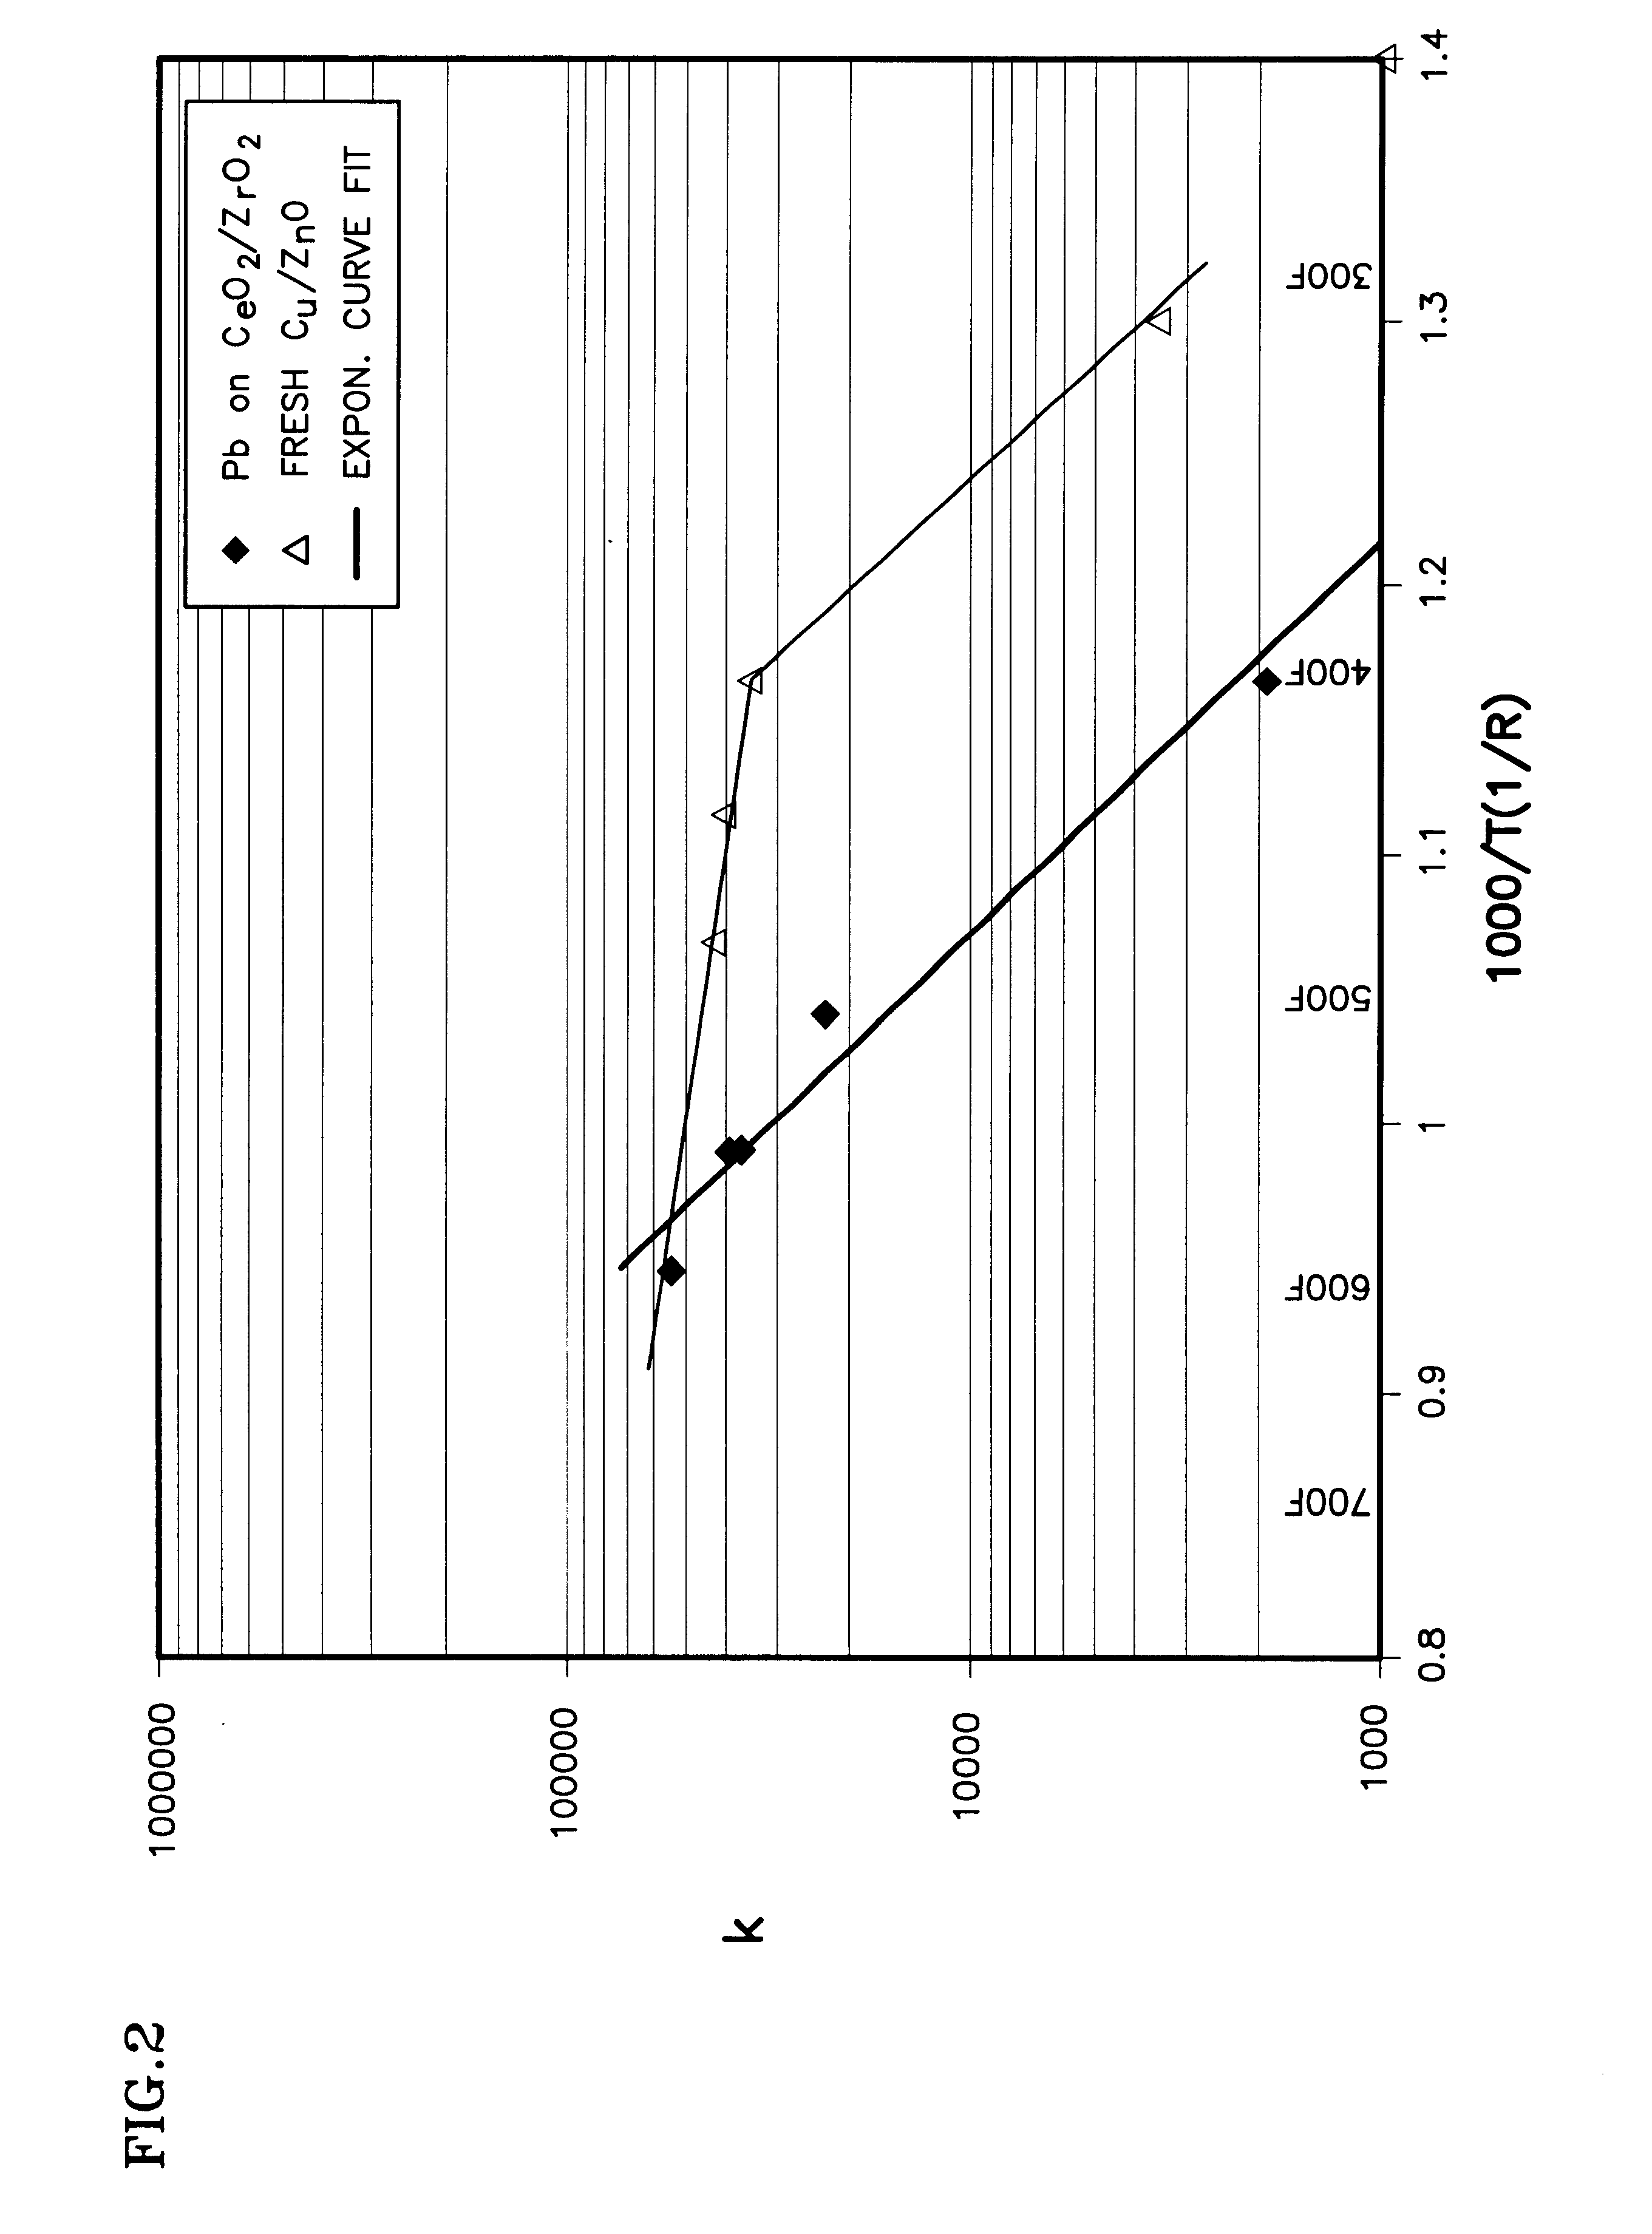 Shift converter having an improved catalyst composition, and method for its use